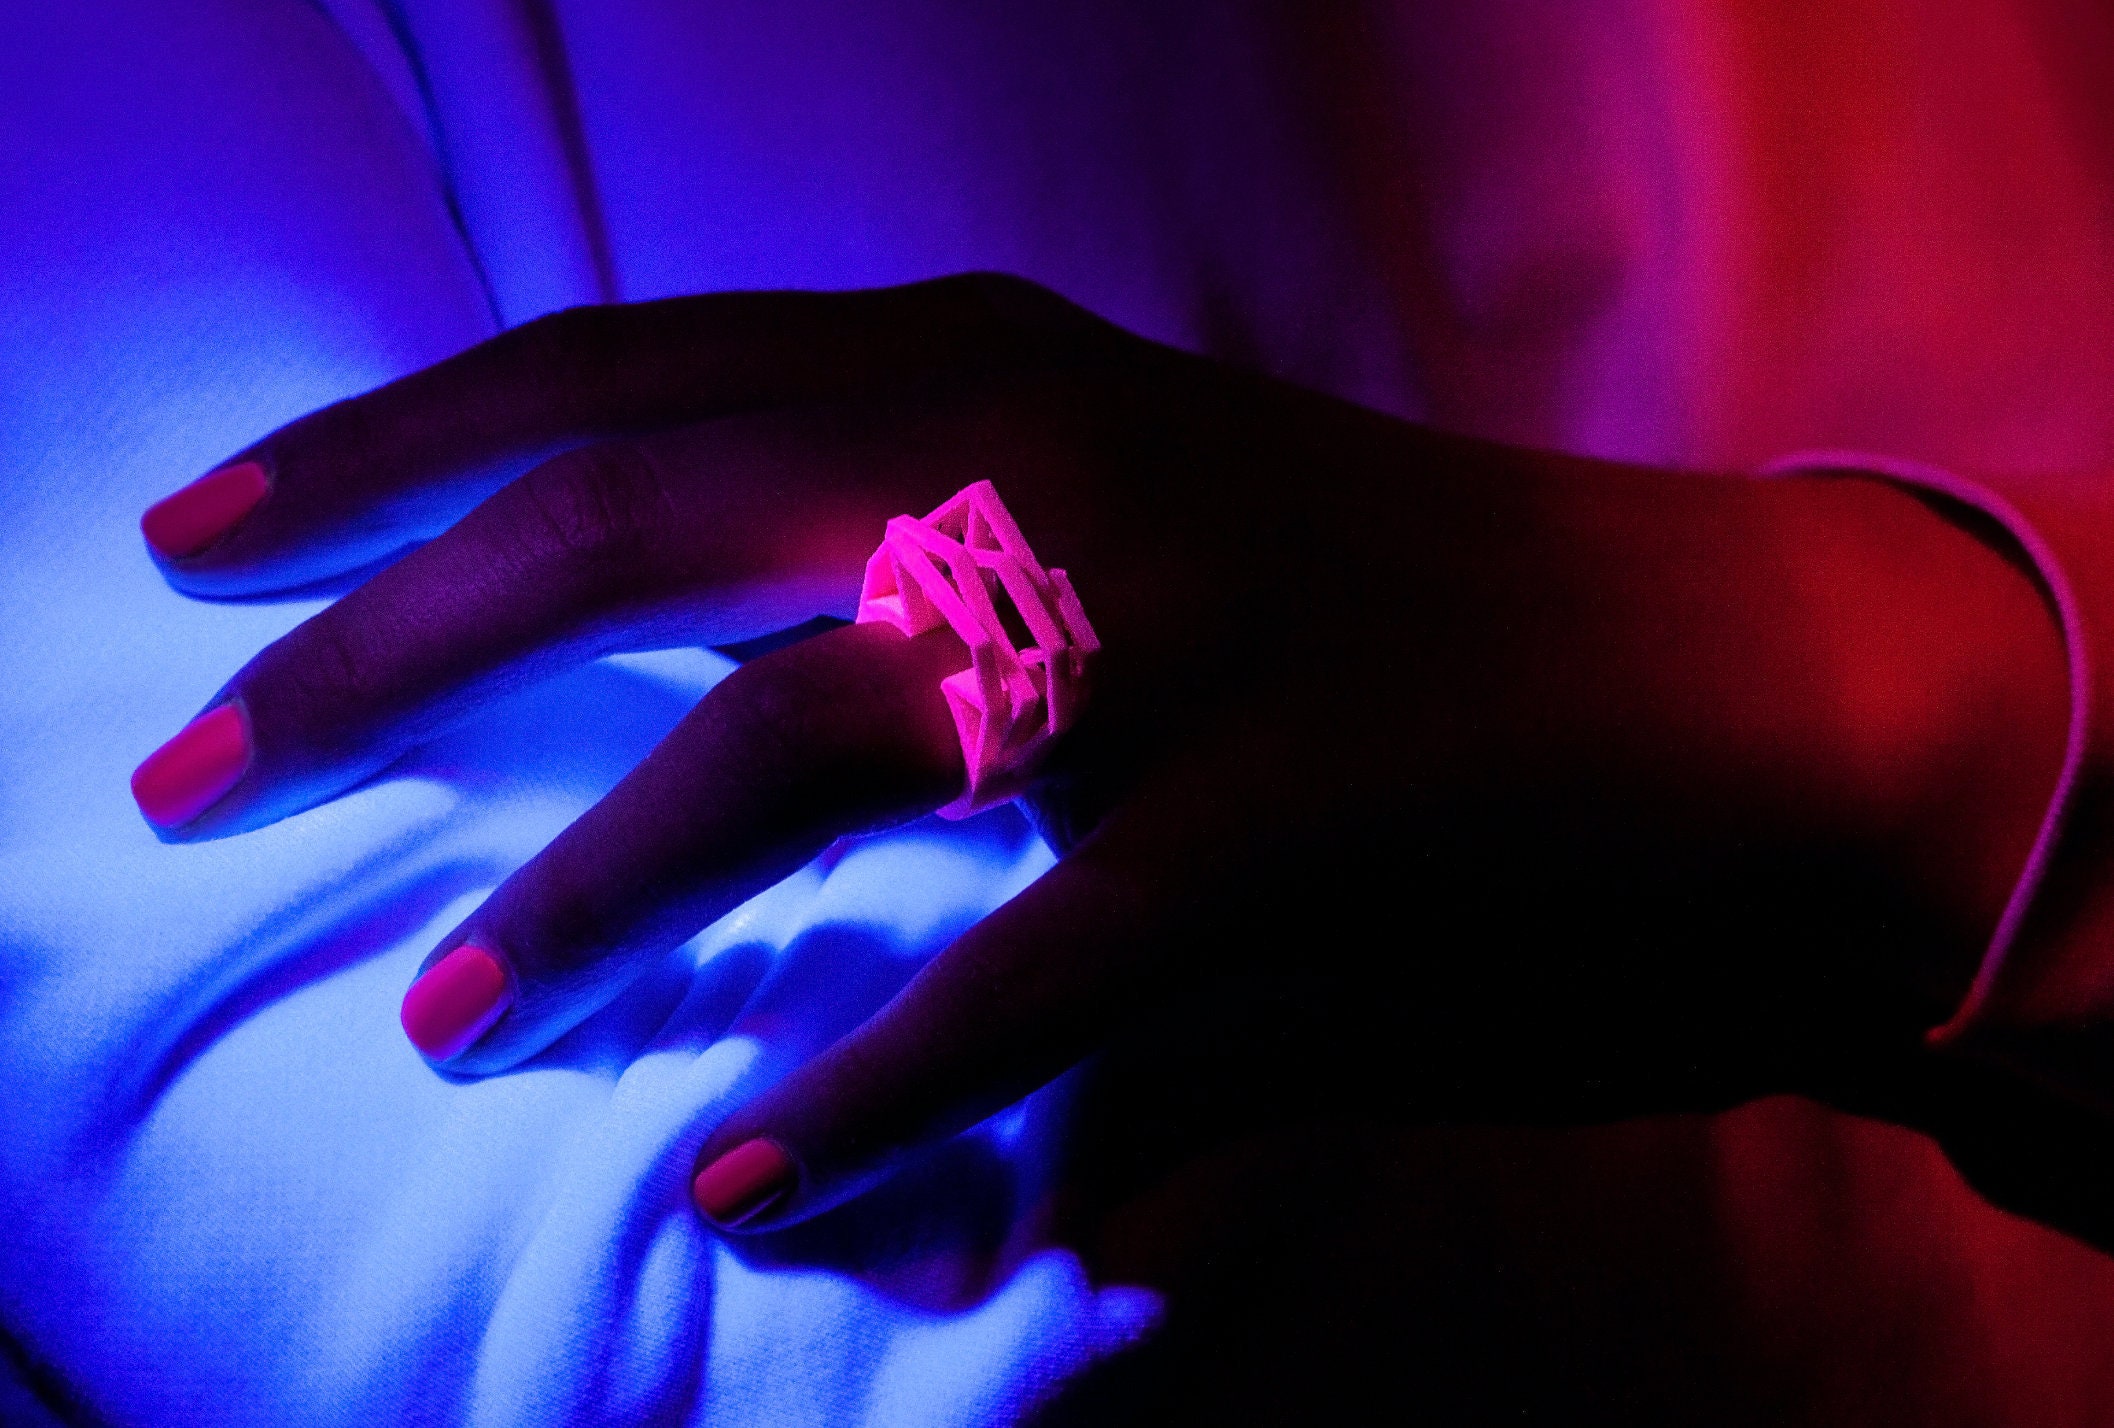 3D printed neon pink ring blacklight jewellery space | Etsy